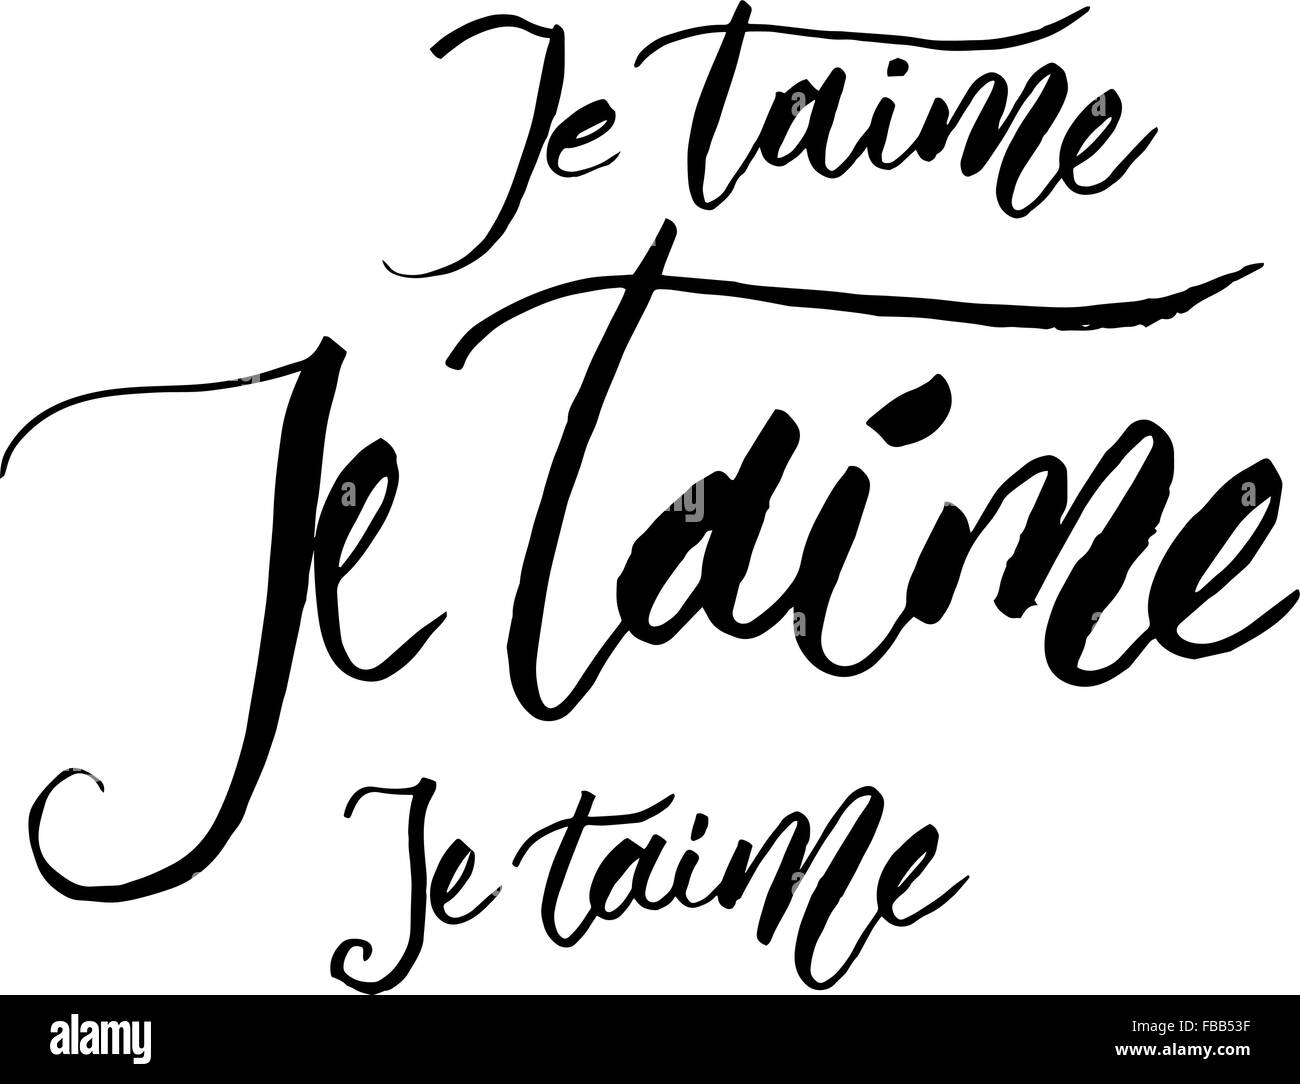 je taime - I love you in french handlettered. Stock Vector